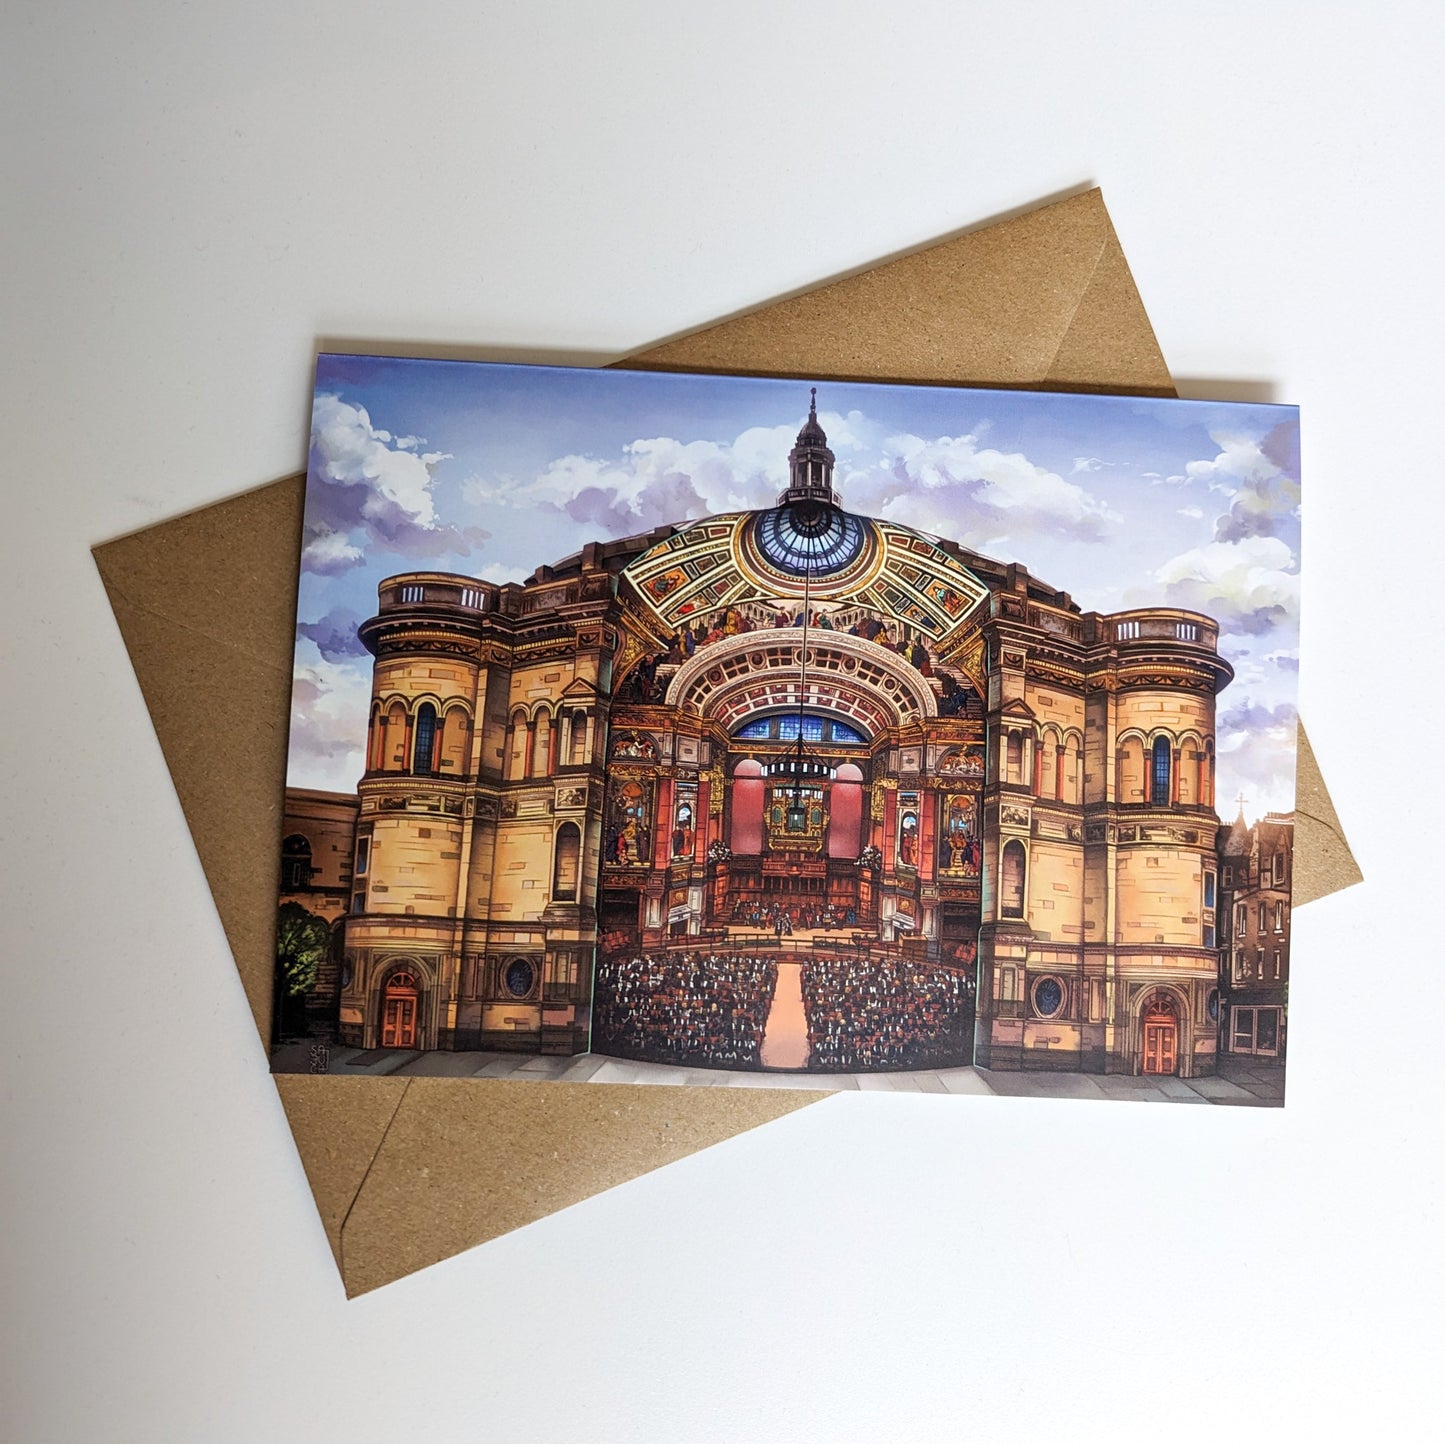 Greeting Card with art design of McEwan Hall showing the inside and outside of the building.